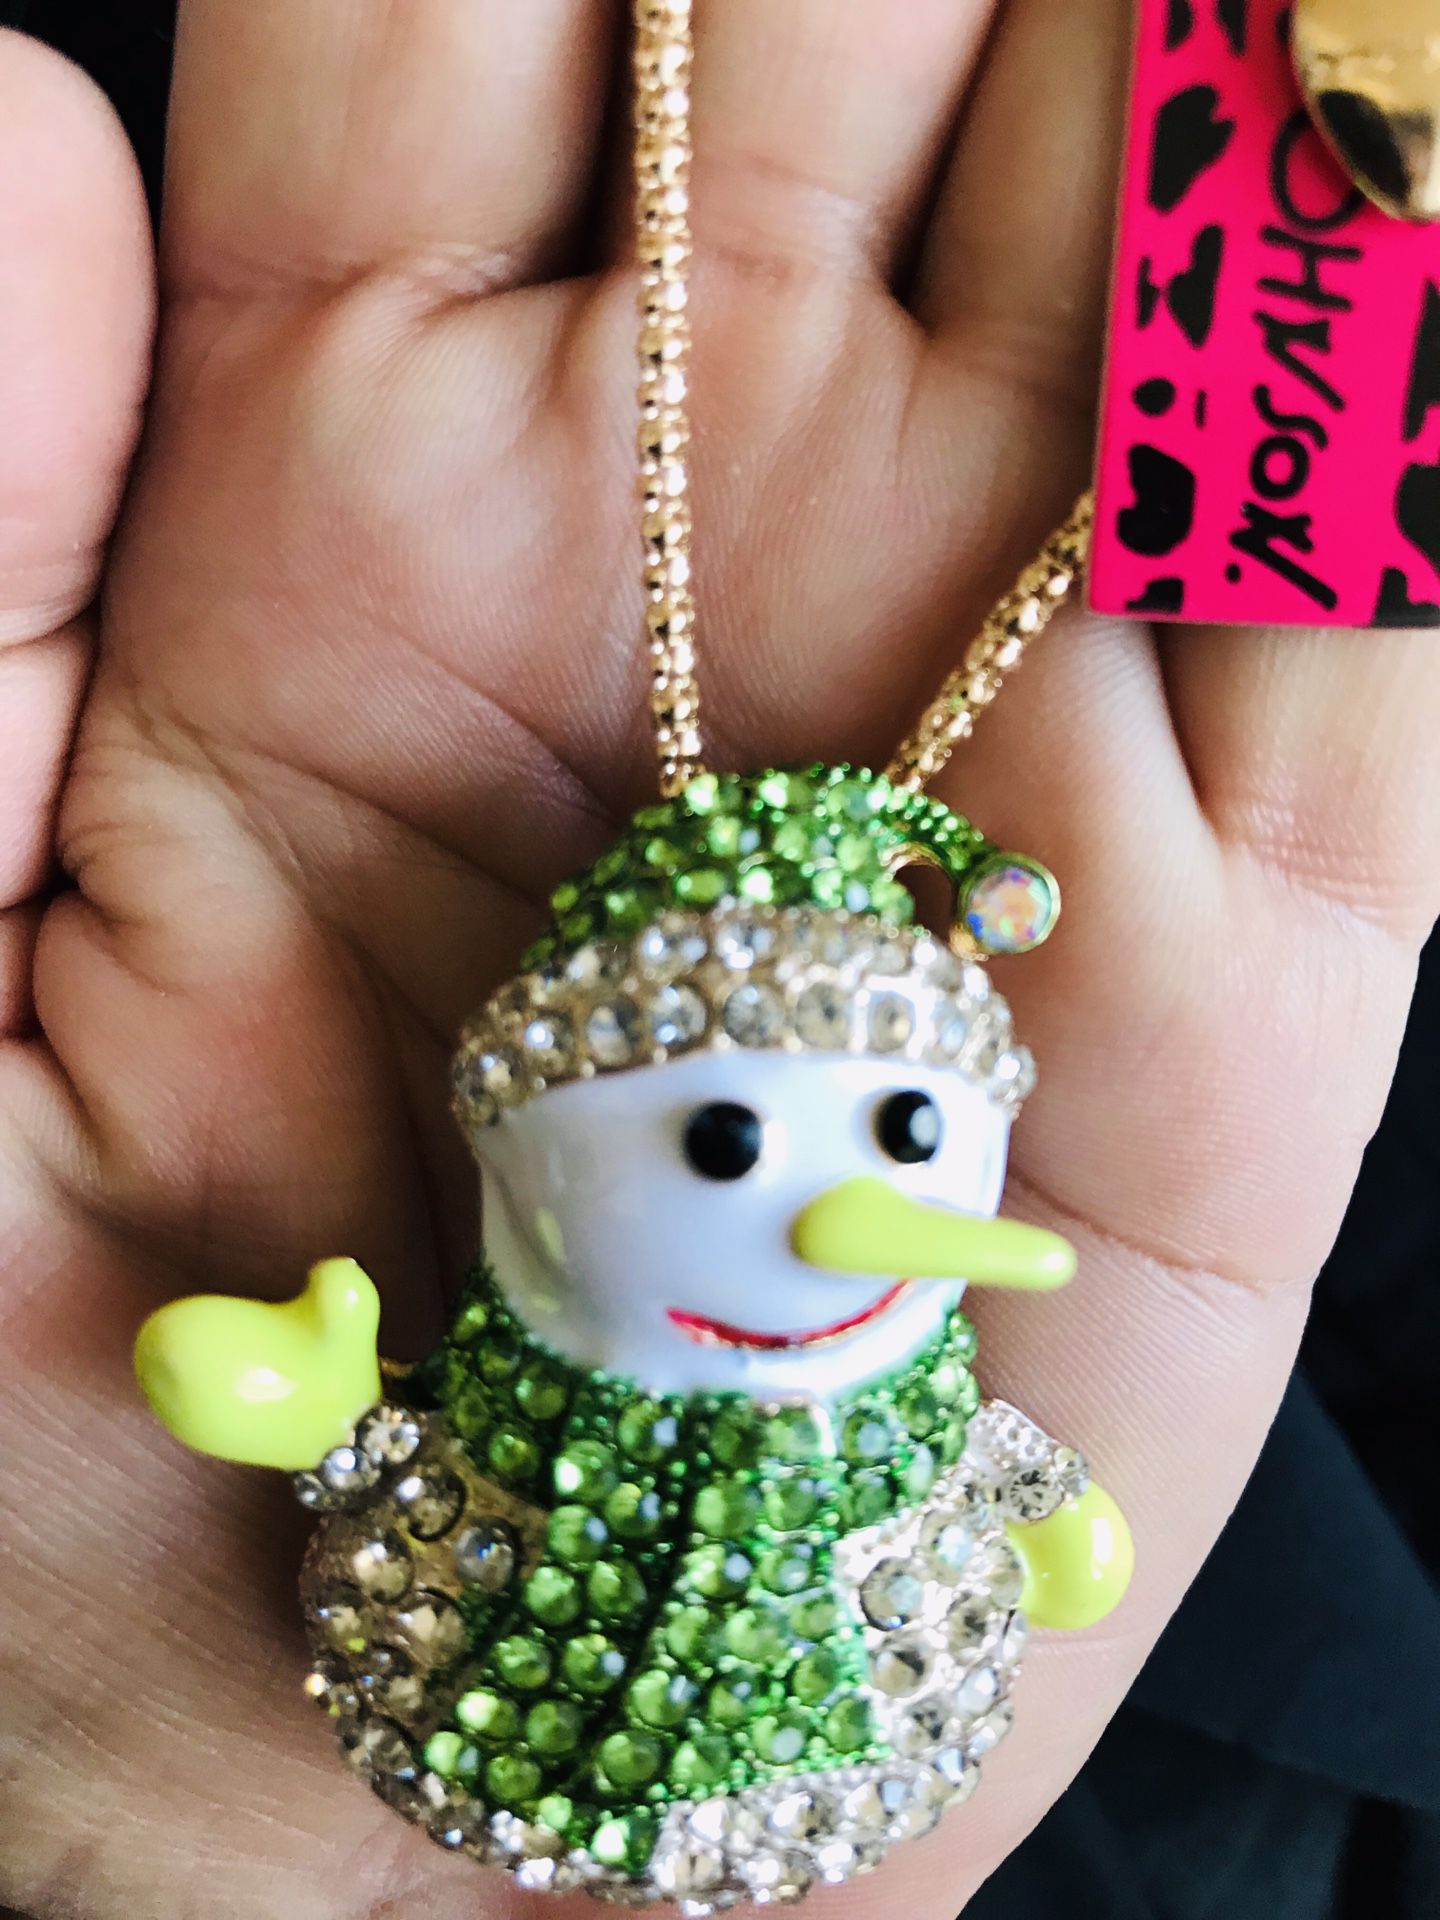 Betsey Johnson snowman 27 inch necklace/brooch ⛄️ ⛄️⛄️⛄️$10 $10 $10